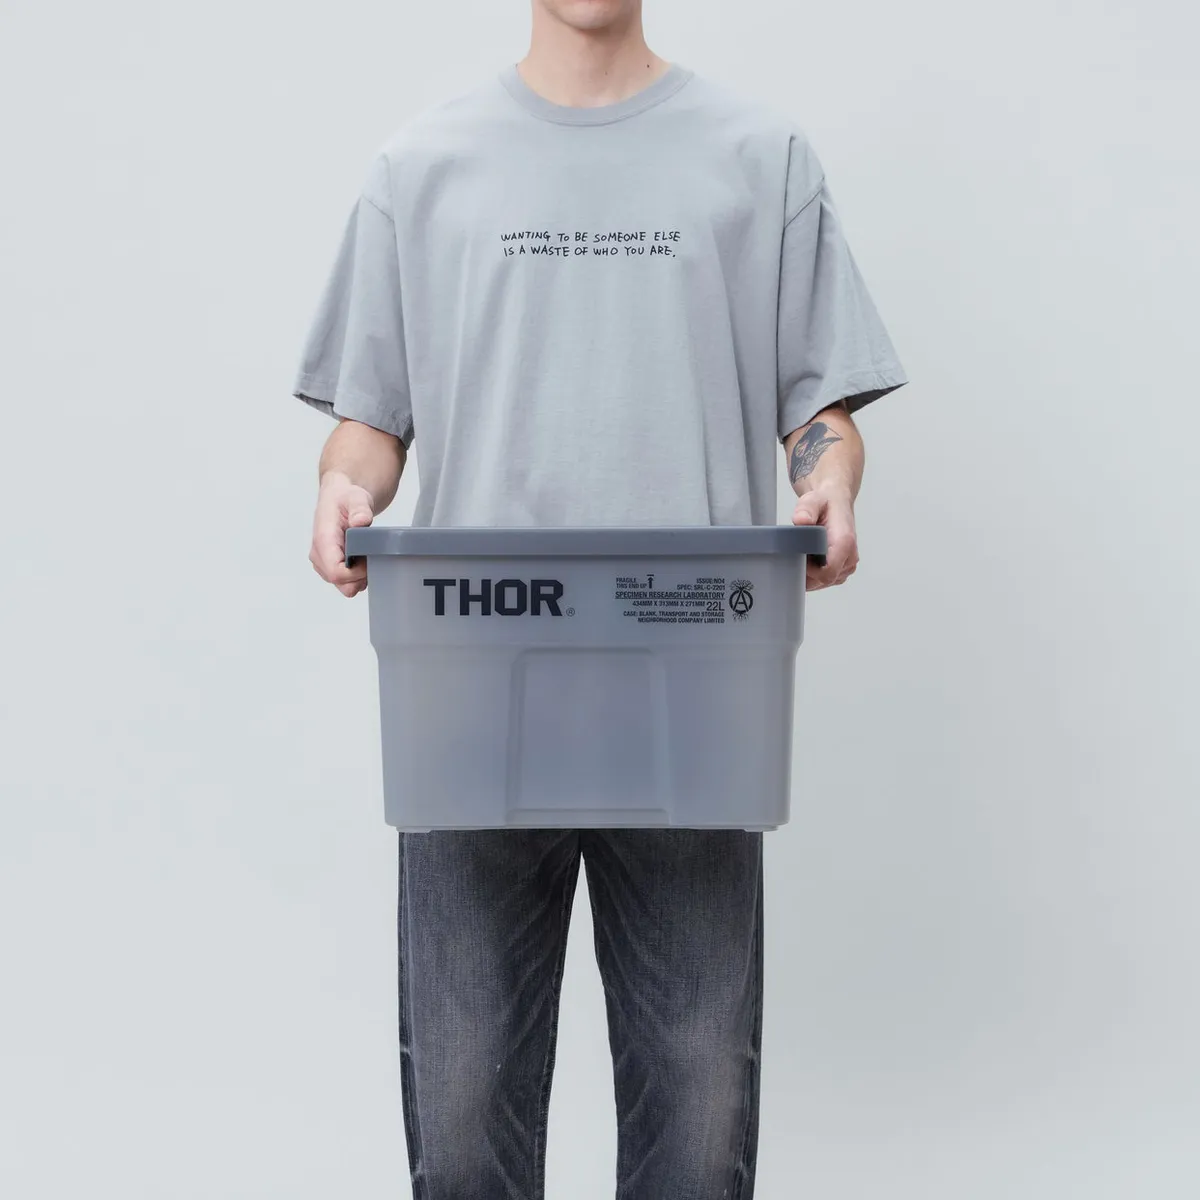 NEIGHBORHOOD SRL .THOR 22 P-TOTES CONTAINER 集裝箱(小)